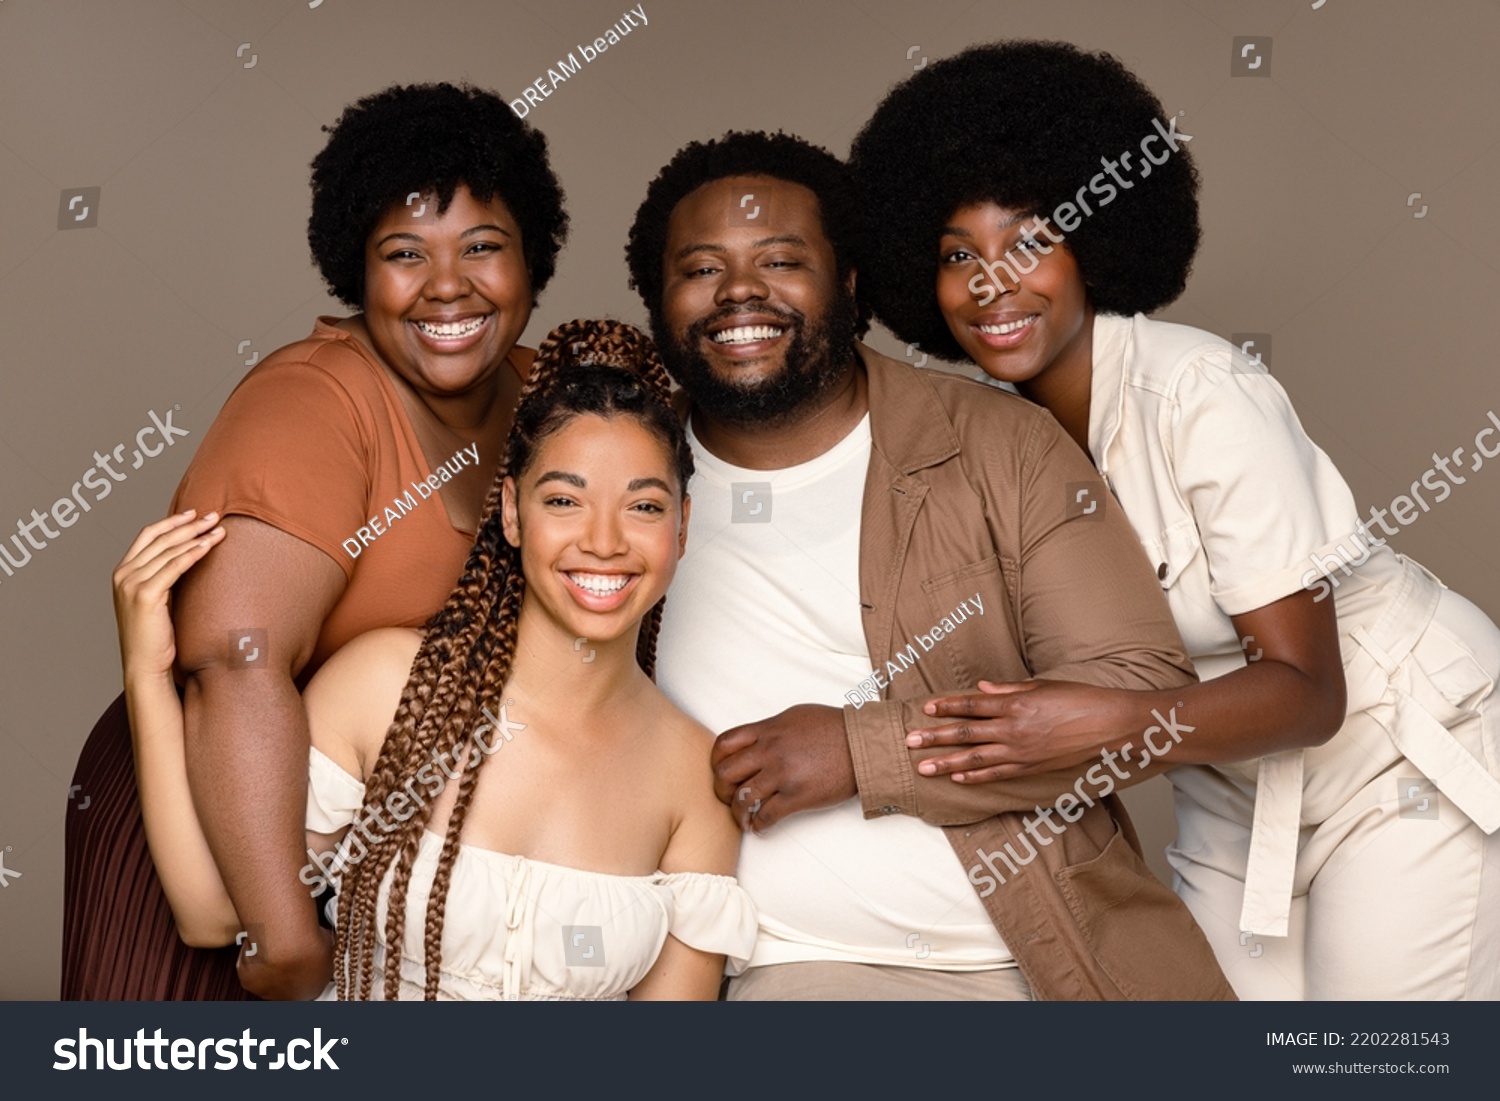 Portrait of a group of gorgeous multiracial people smiling together on a neutral background. #2202281543